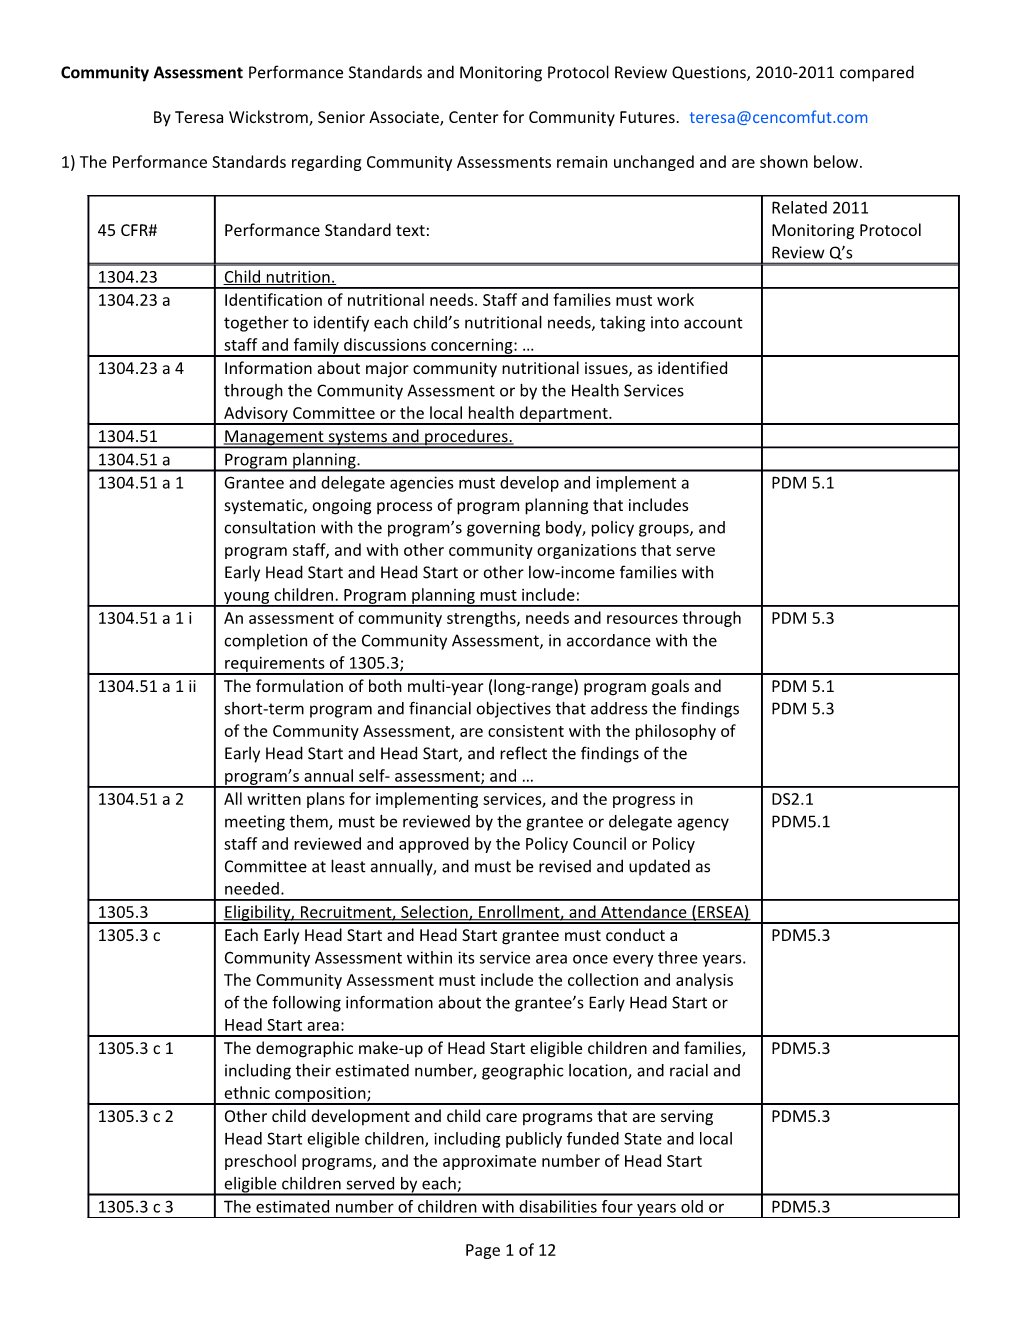 Community Assessment Performance Standards and Monitoring Protocol Review Questions, 2010-2011